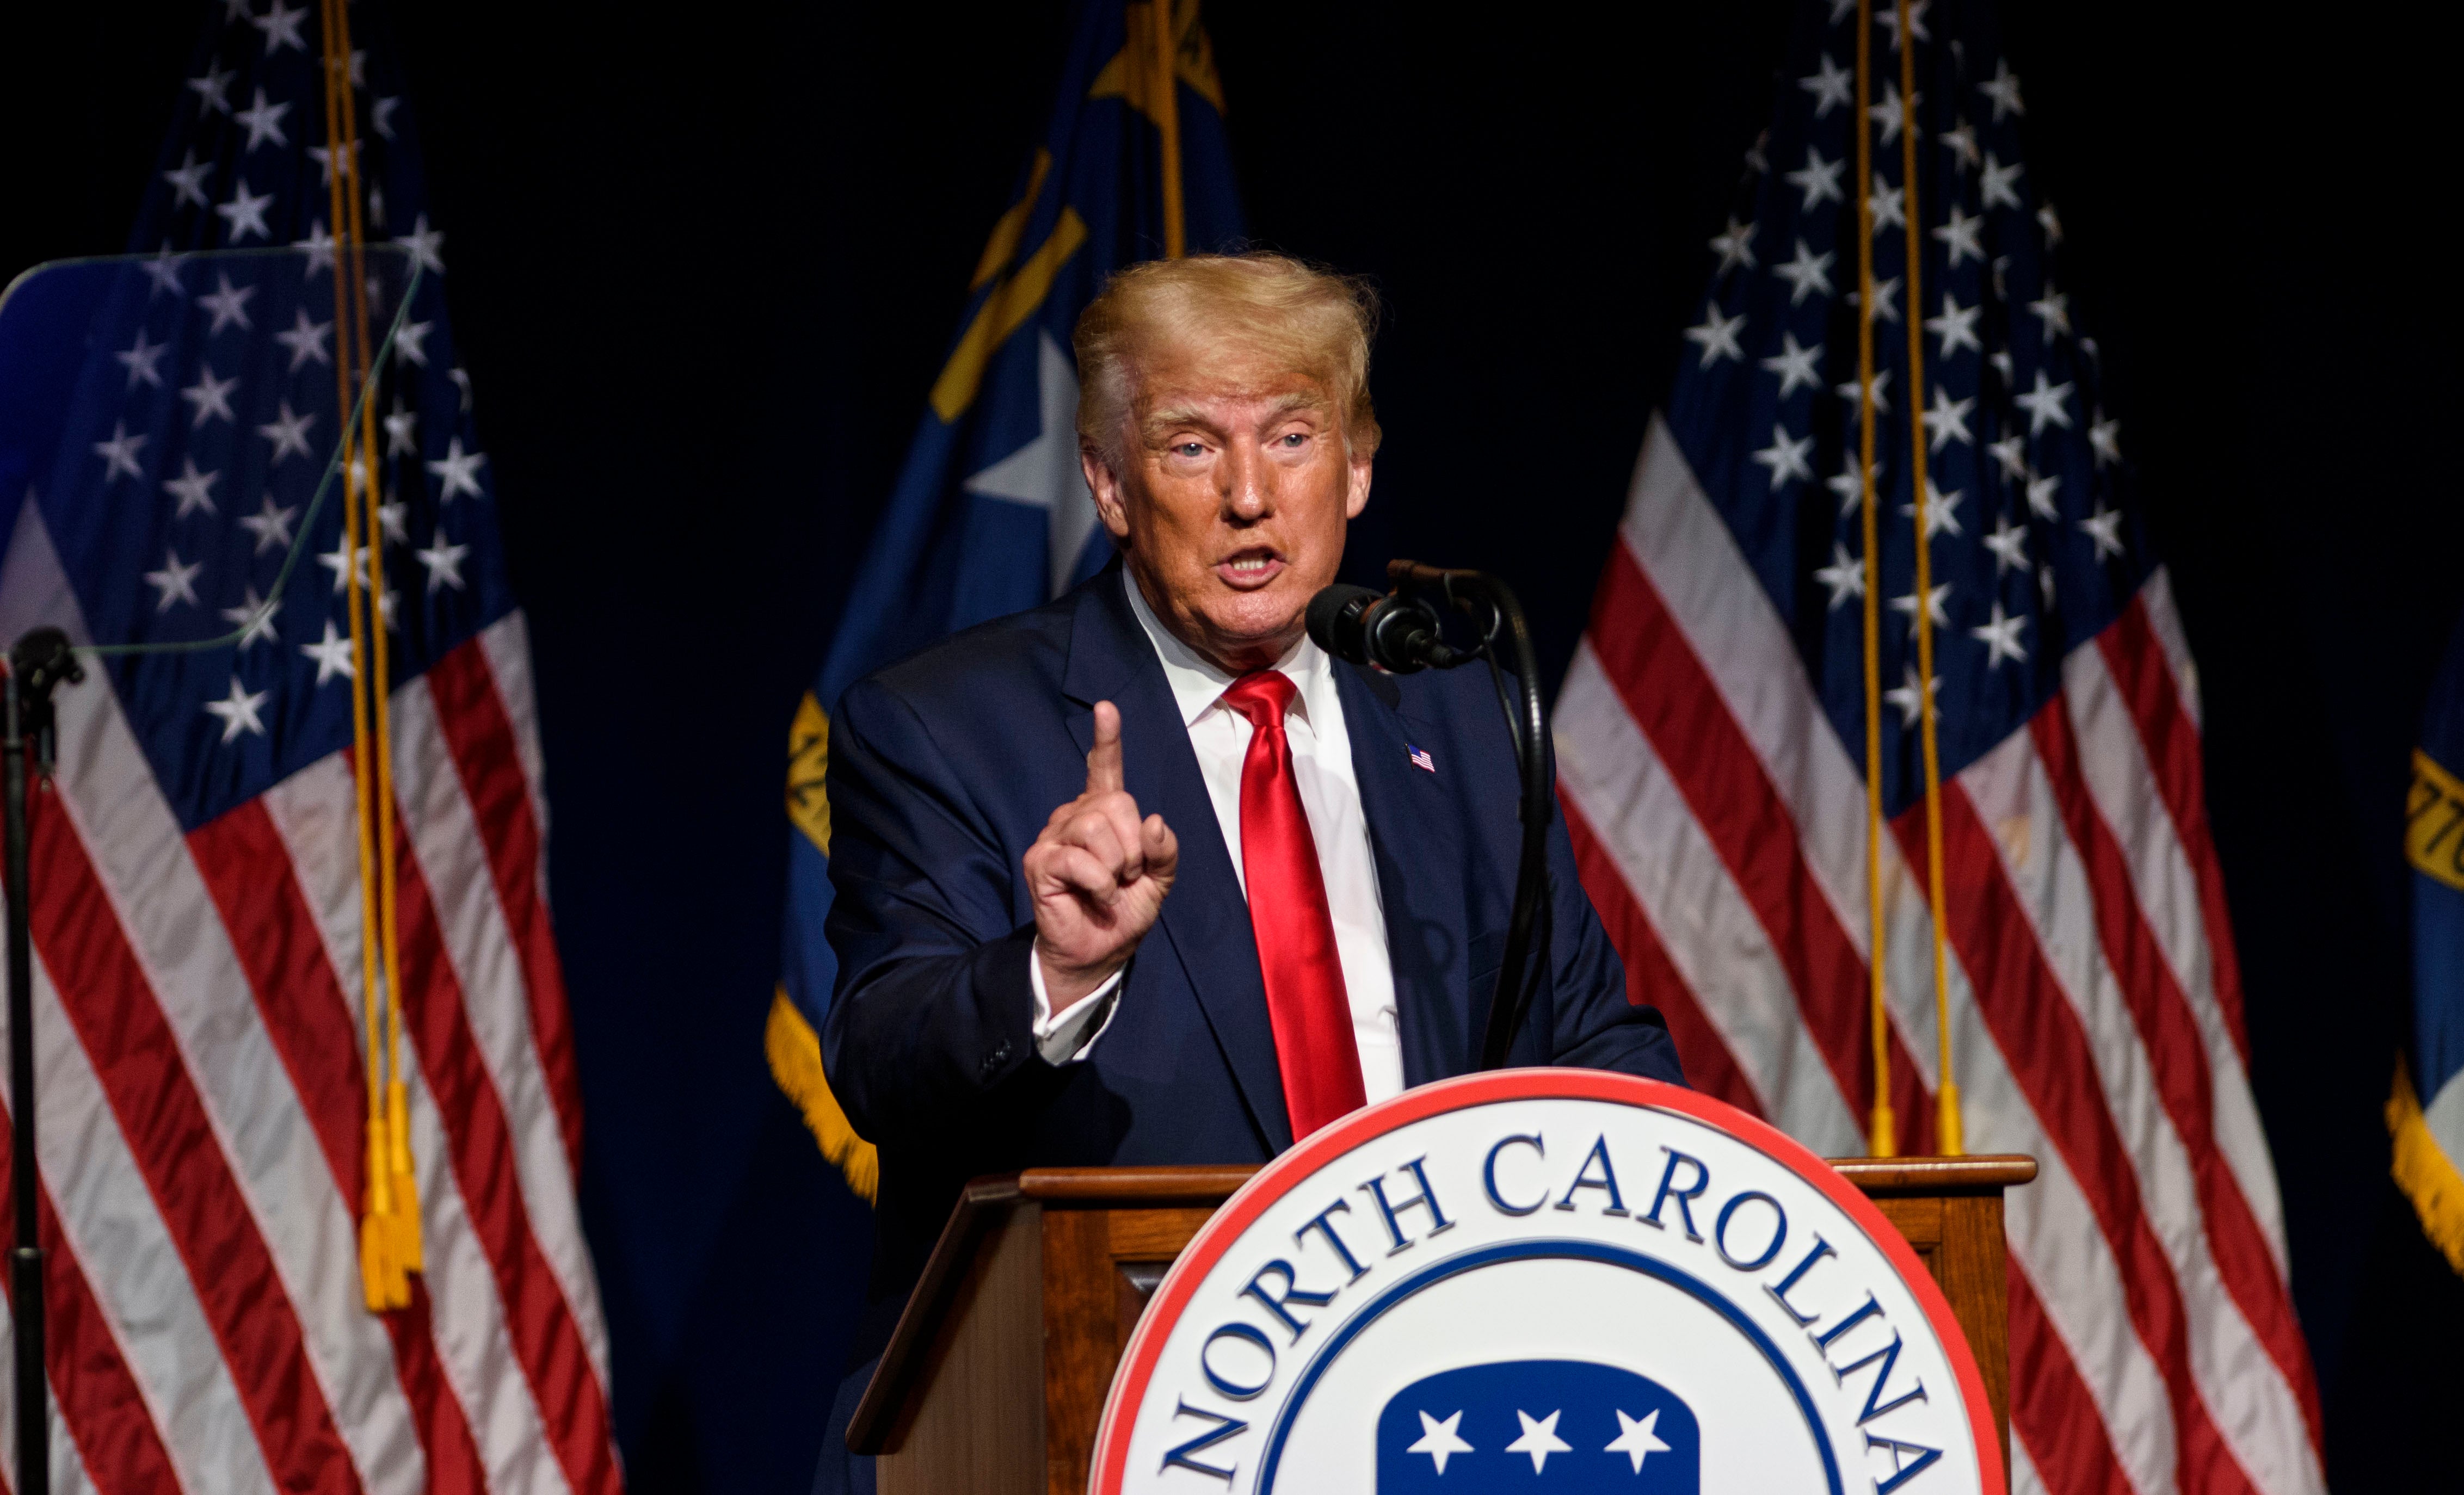 <p>Former US President Donald Trump addresses the NCGOP state convention on June 5, 2021 in Greenville, North Carolina. CNN correspondent Barbara Starr has said a Trump-era Justice Department decision to seize her records was a ‘sheer abuse of power’.</p>